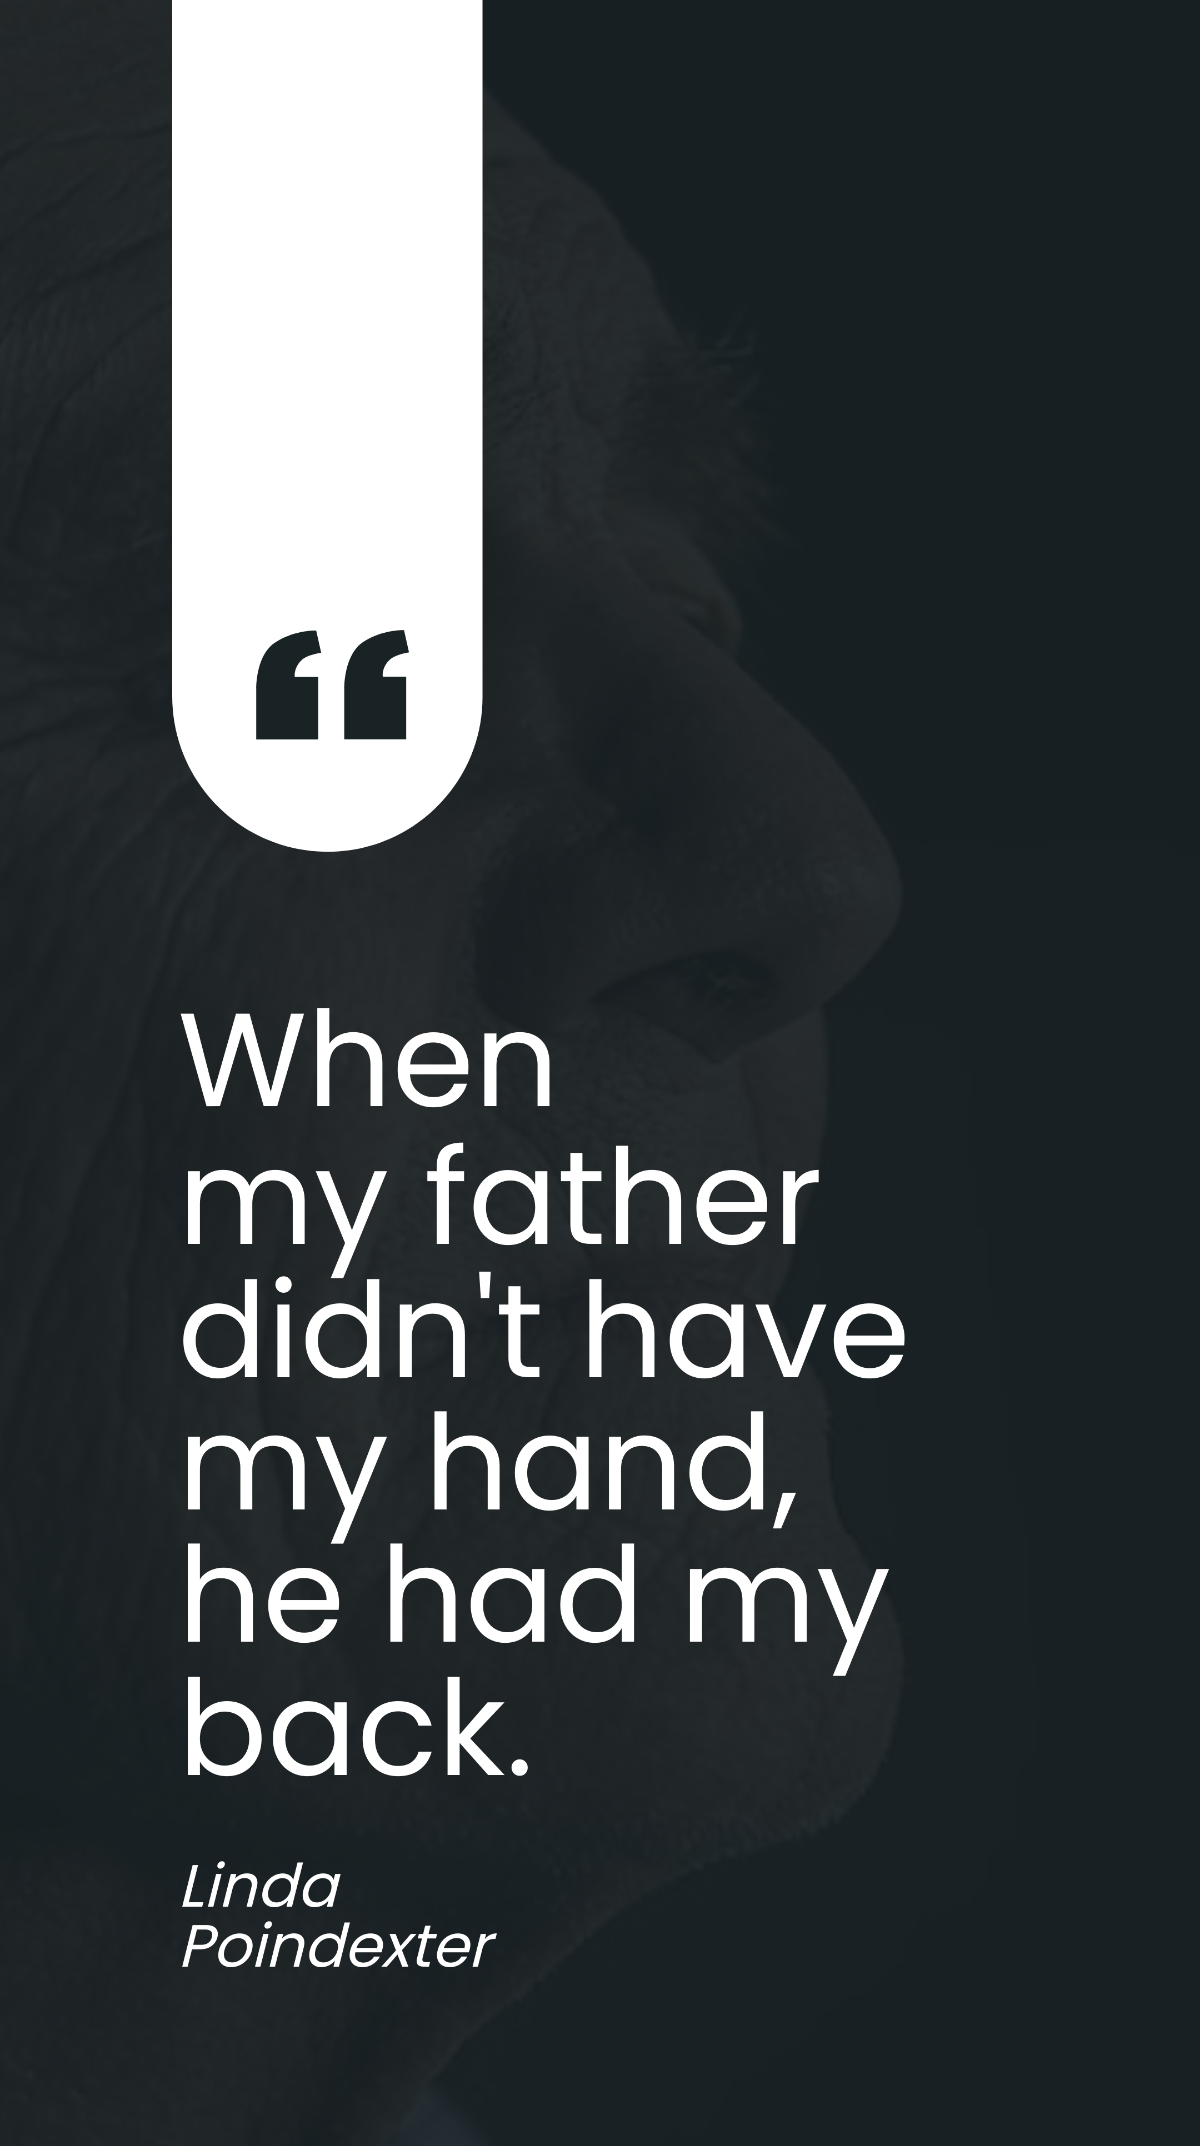 Linda Poindexter - When my father didn't have my hand, he had my back. Template